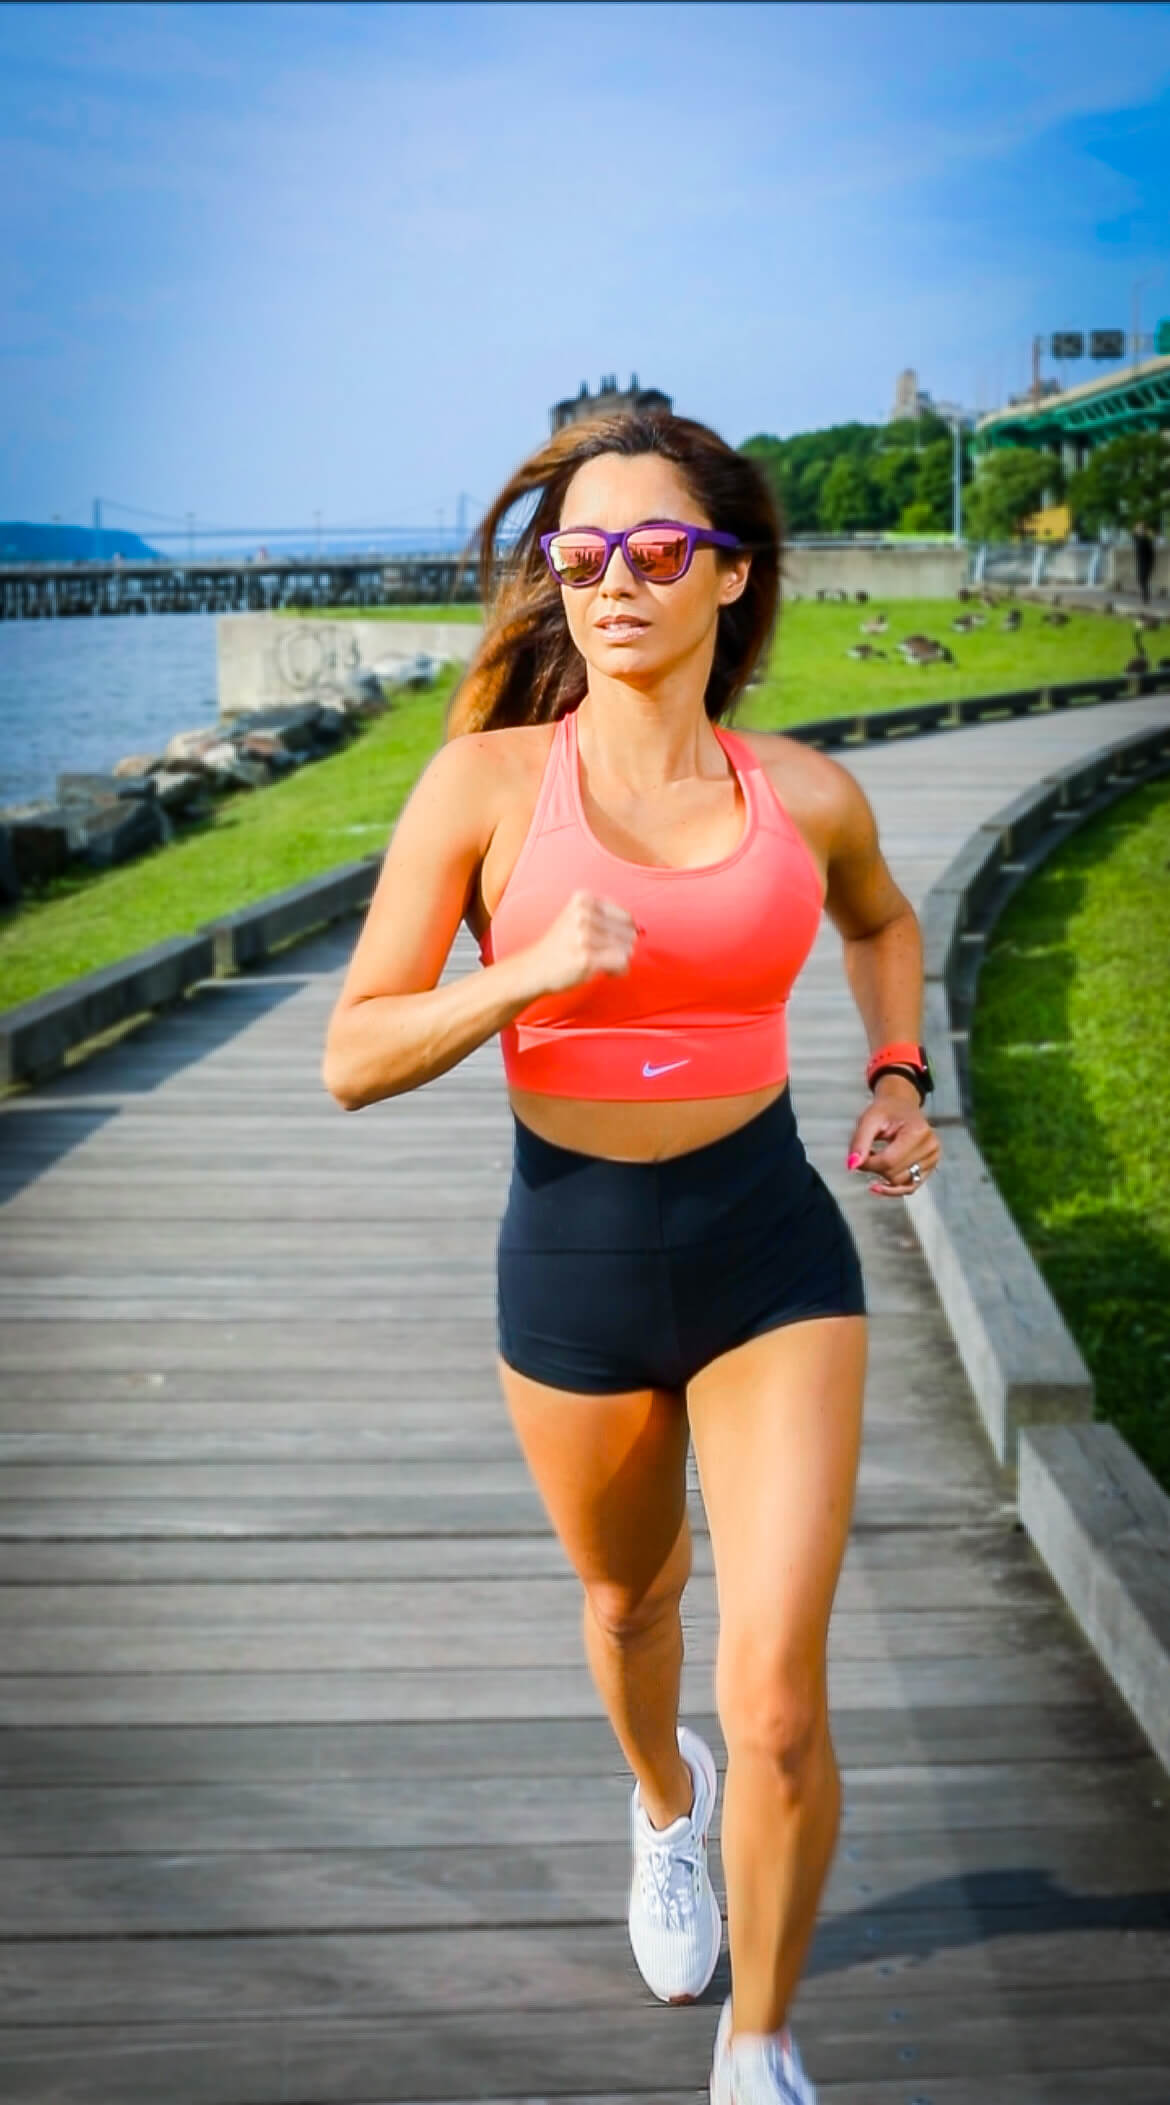 Purple polarized sunglasses for runners by Tierra Sunglasses